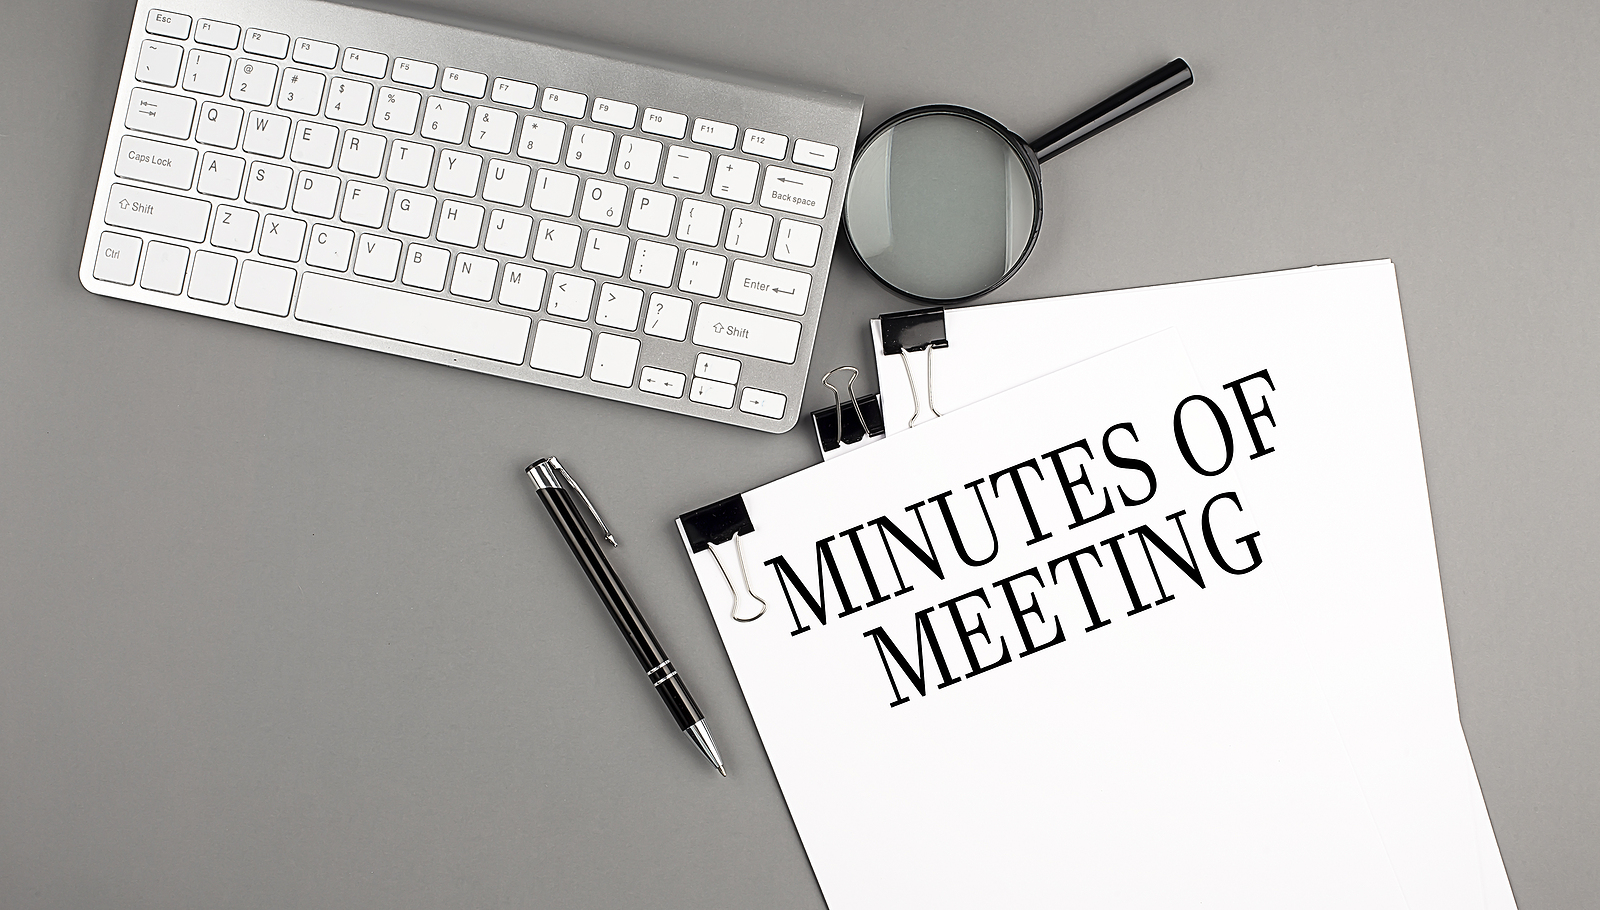 MINUTES OF MEETING text on a paper with keyboard, magnifier and pen. Business concept